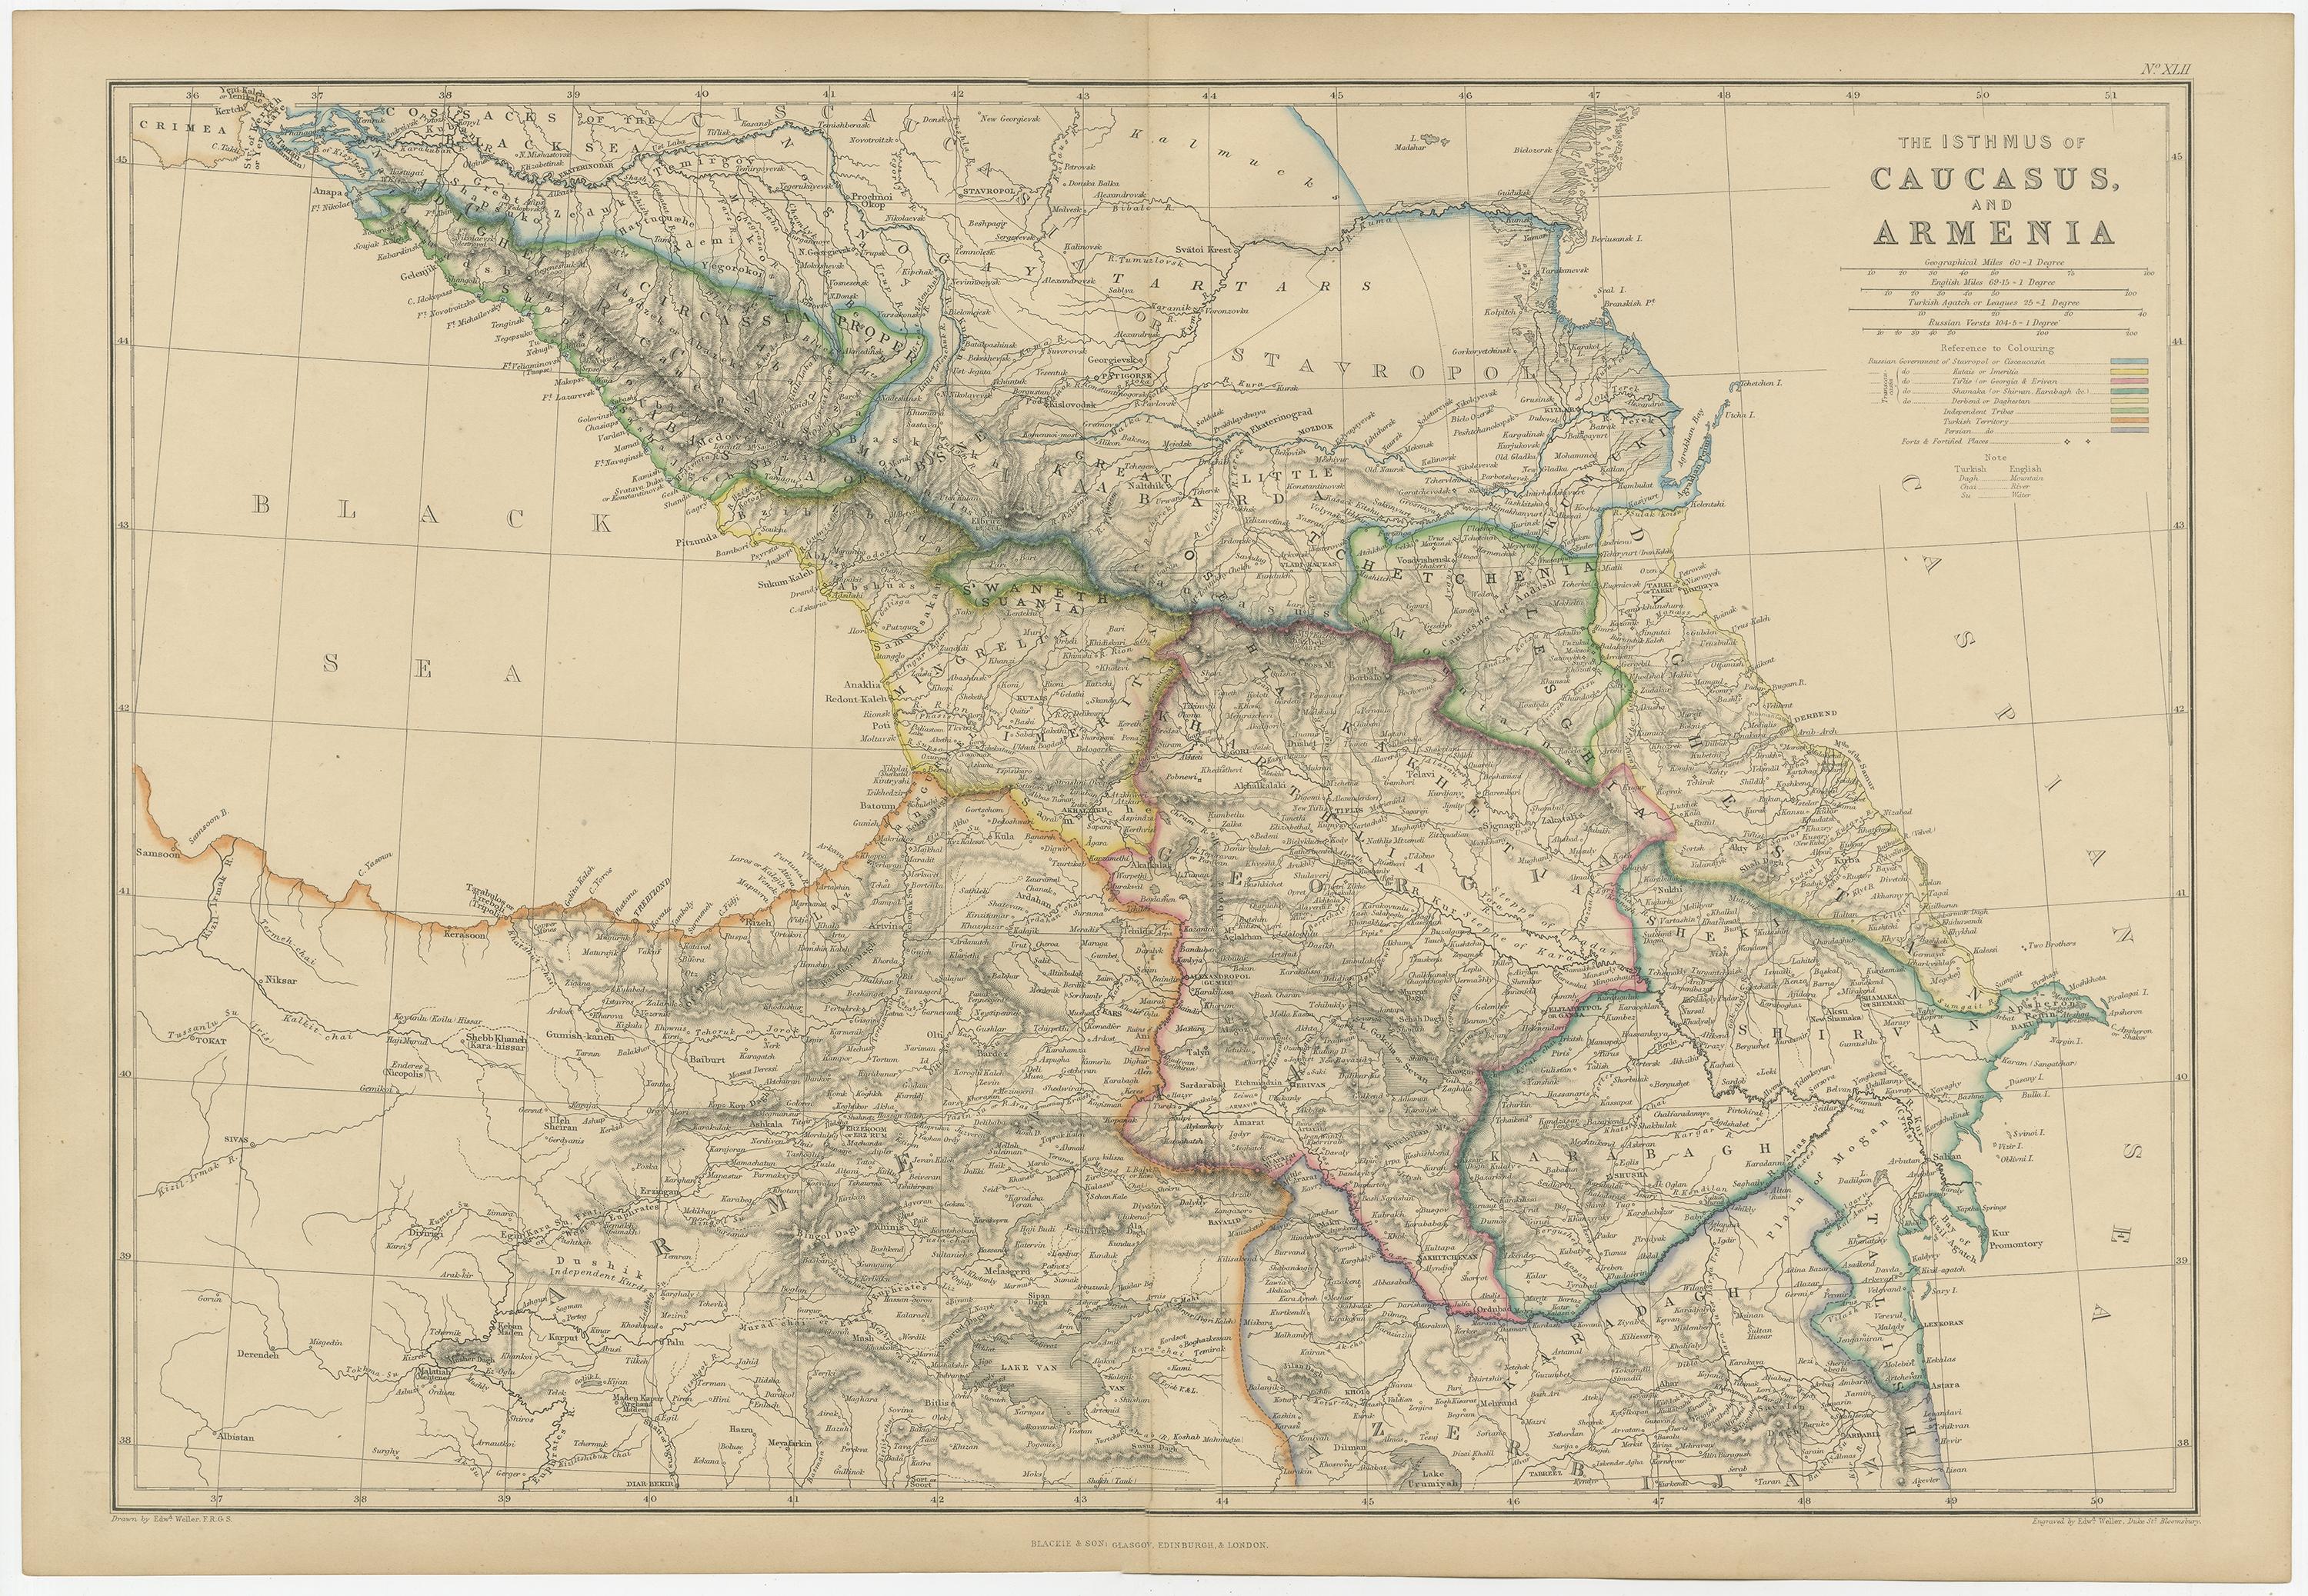 Antique map titled 'the Isthmus of Caucasus and Armenia'. Original antique map of the Caucasus and Armenia. This map originates from ‘The Imperial Atlas of Modern Geography’. Published by W. G. Blackie, 1859.